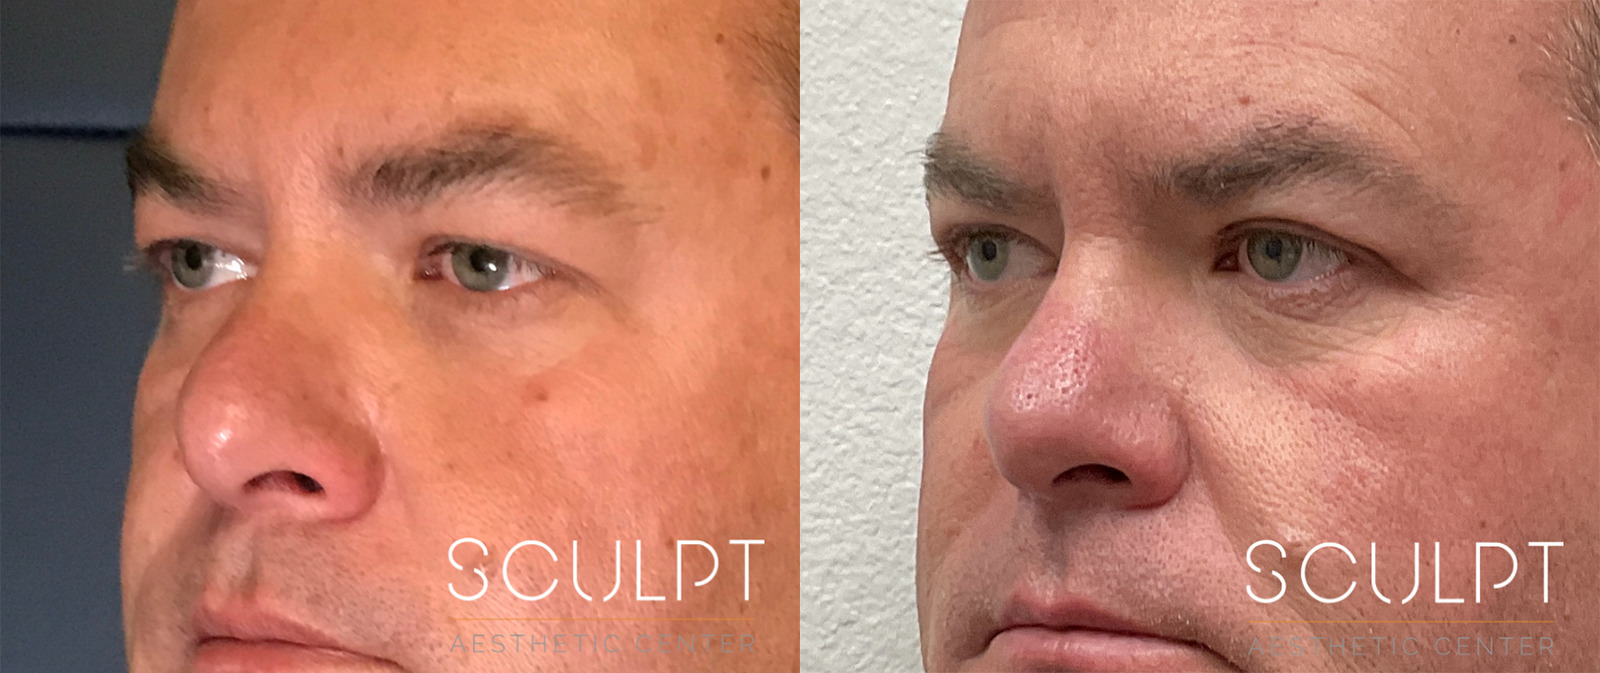 Male Eyelid Surgery Before and After Photo by Sculpt Aesthetic Center in Frisco, TX